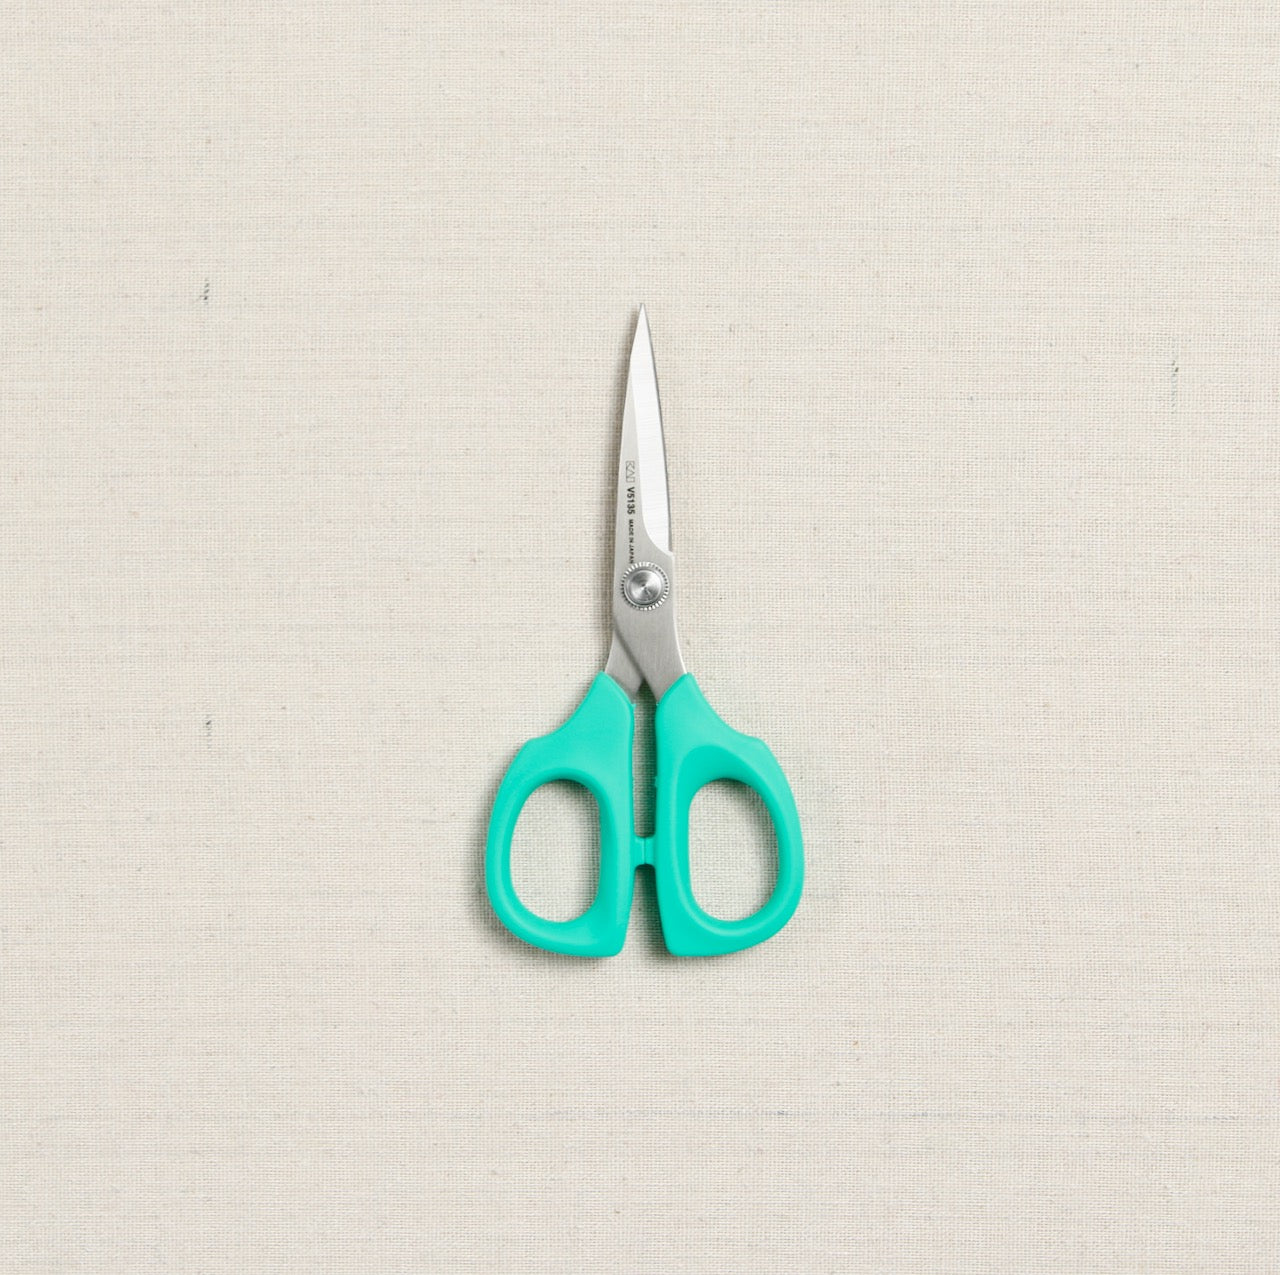 Kai - Teal 8 inch Shears (V5210T) - 4901601001716. Quilting Notions